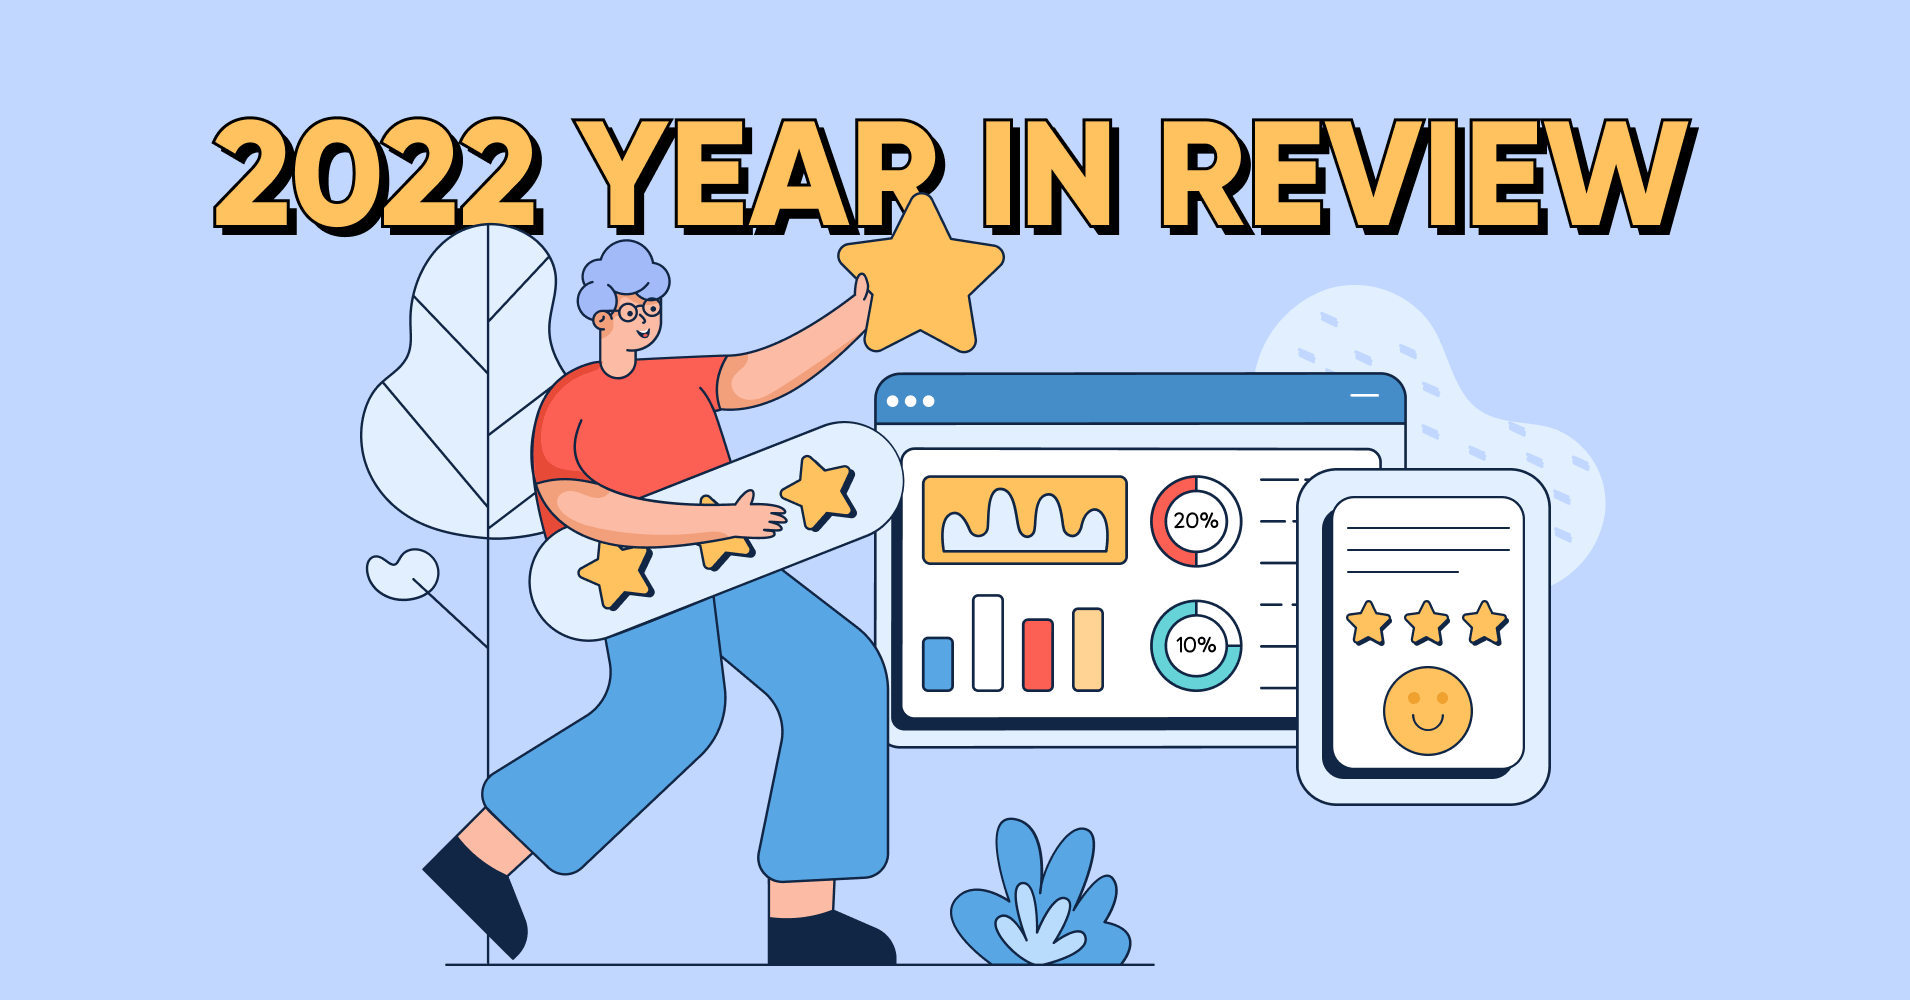 2022 Year in Review: Whats New, What's Next?